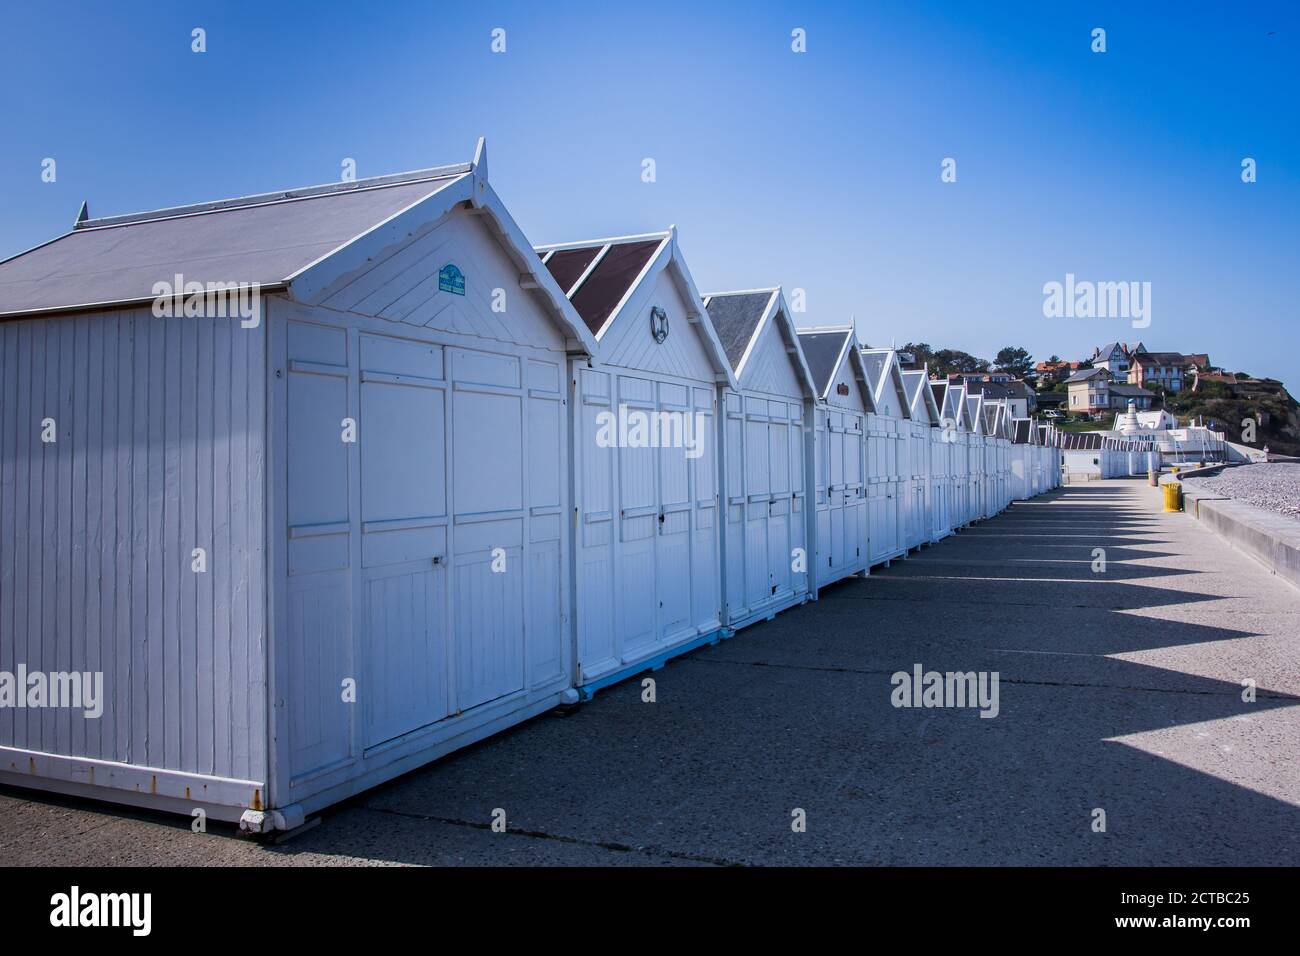 Wooden huts on the beach in Normandy, France Stock Photo